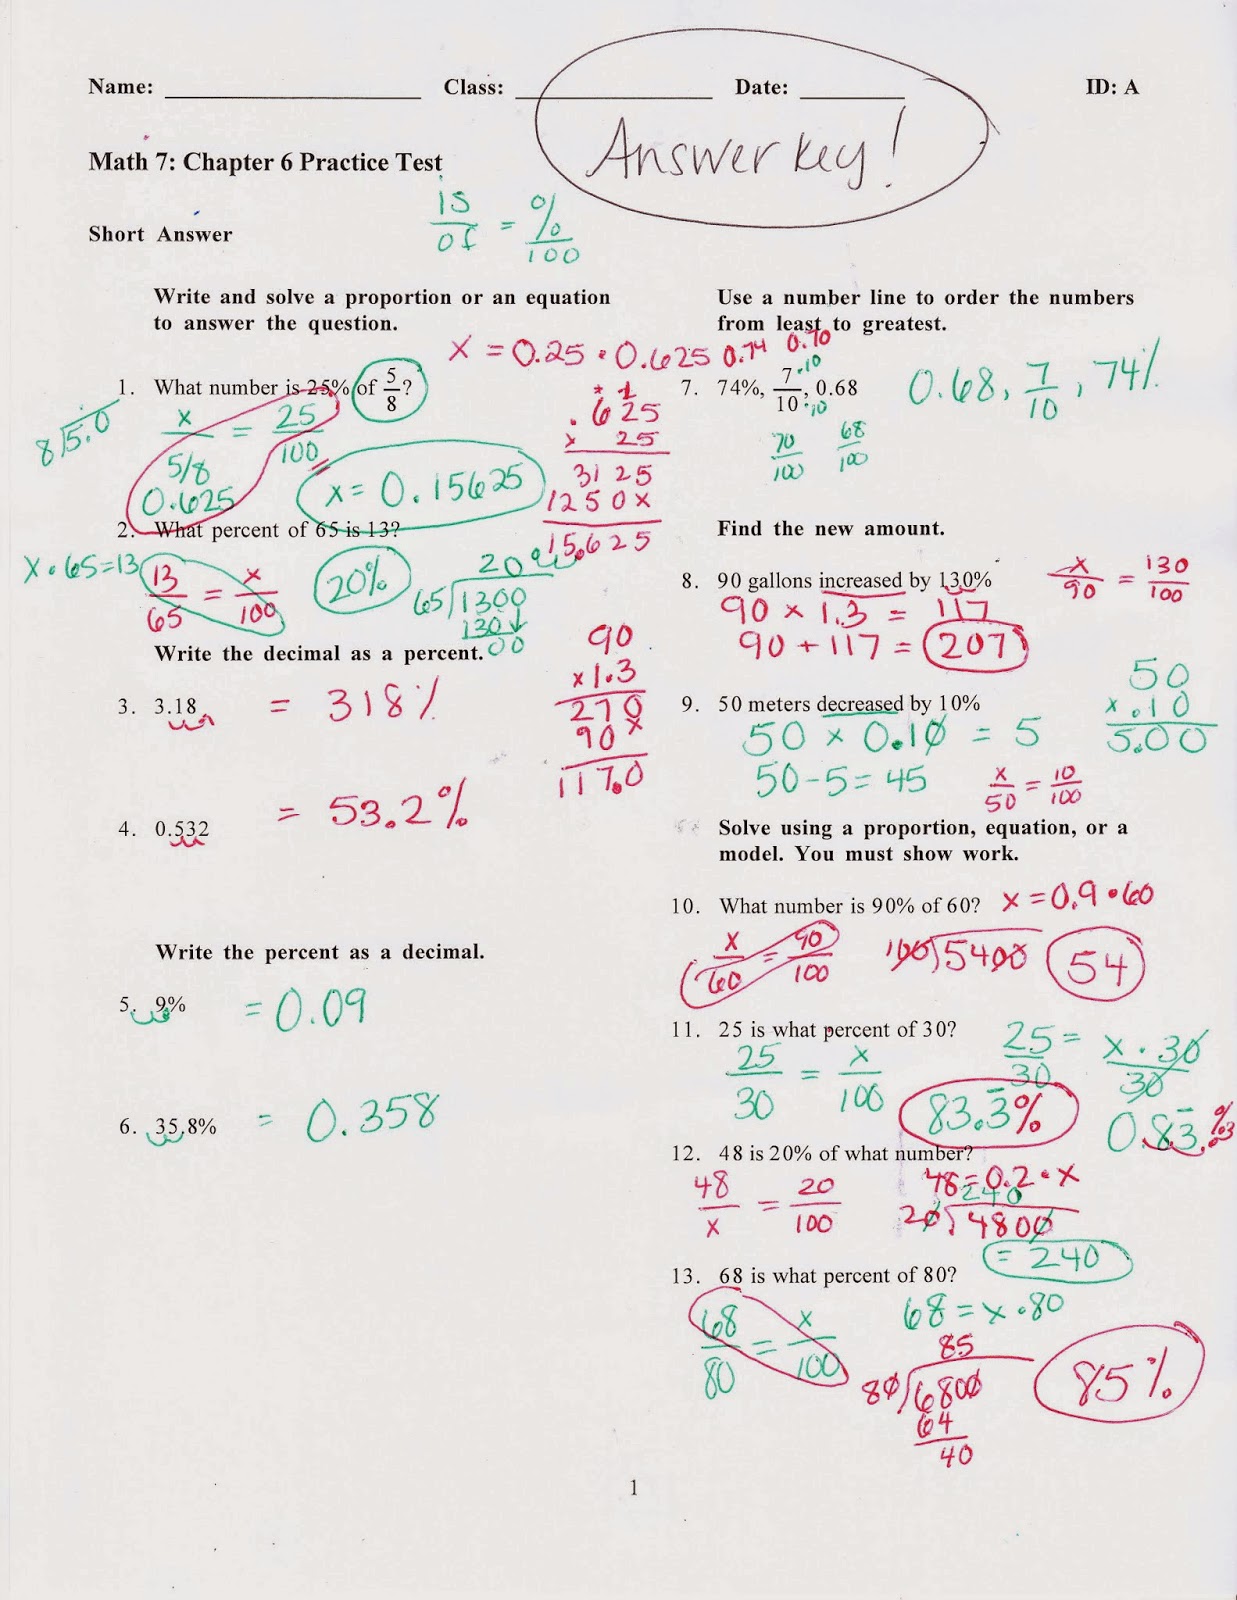 Ms Jean s Classroom Blog Math 7 Chapter 6 Practice Test Answers